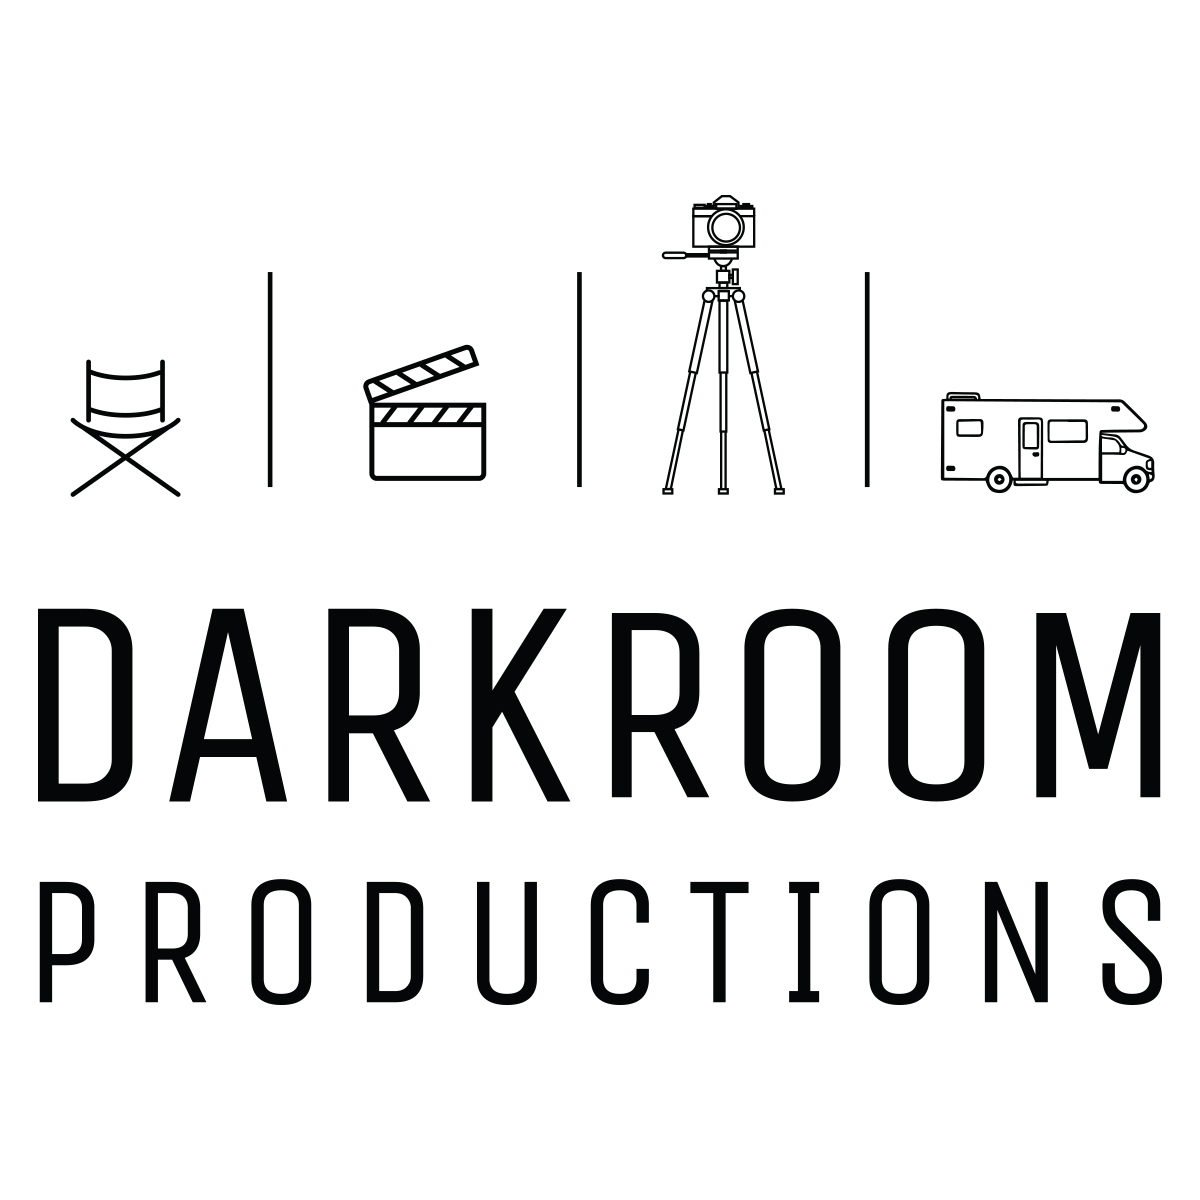 The Darkroom Productions